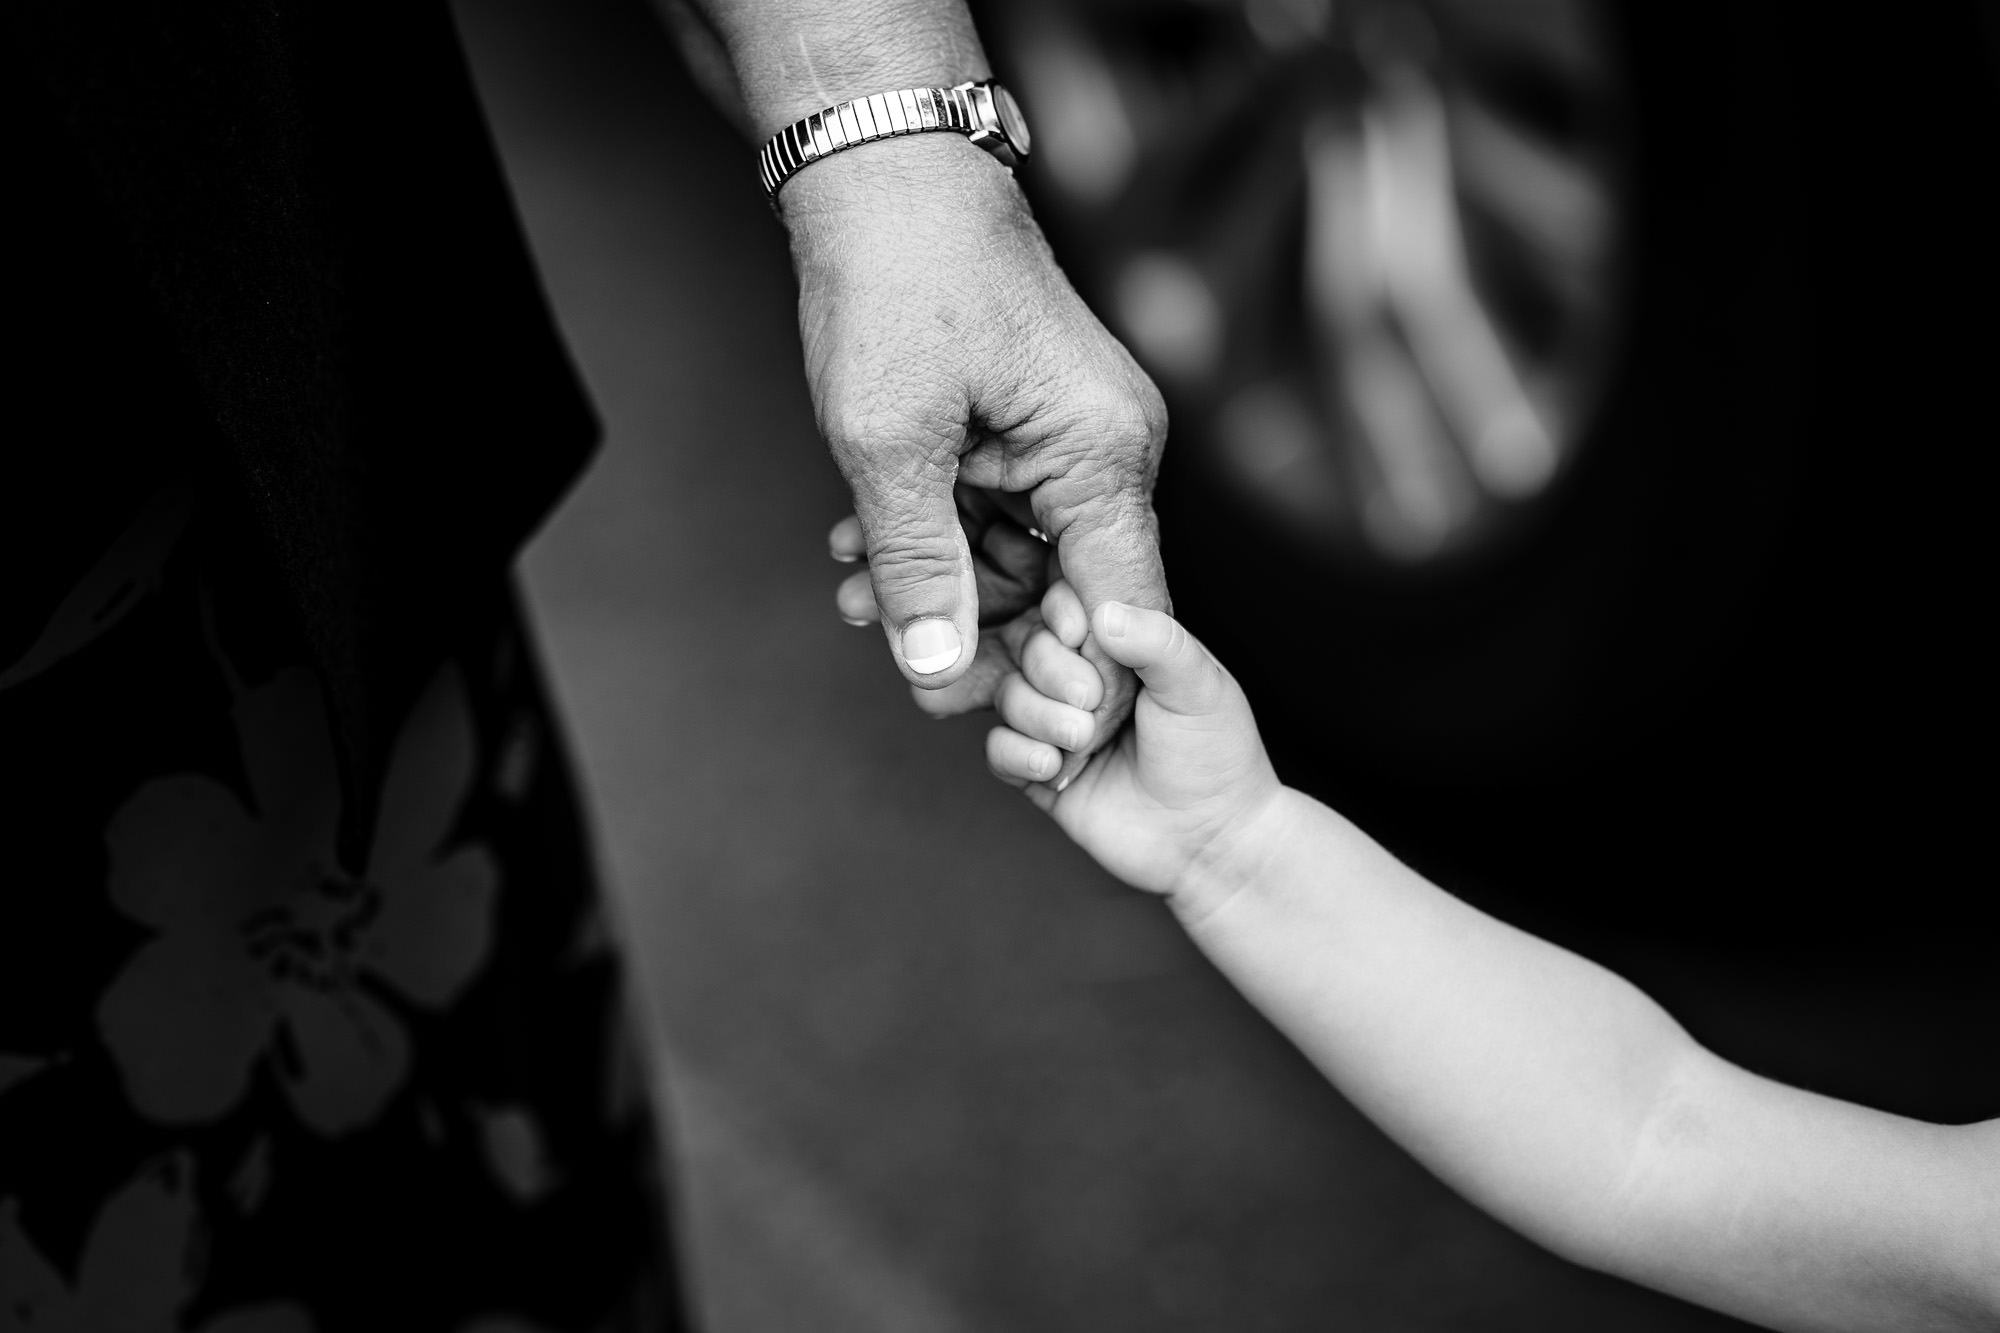 The couple's child holds her family's hands